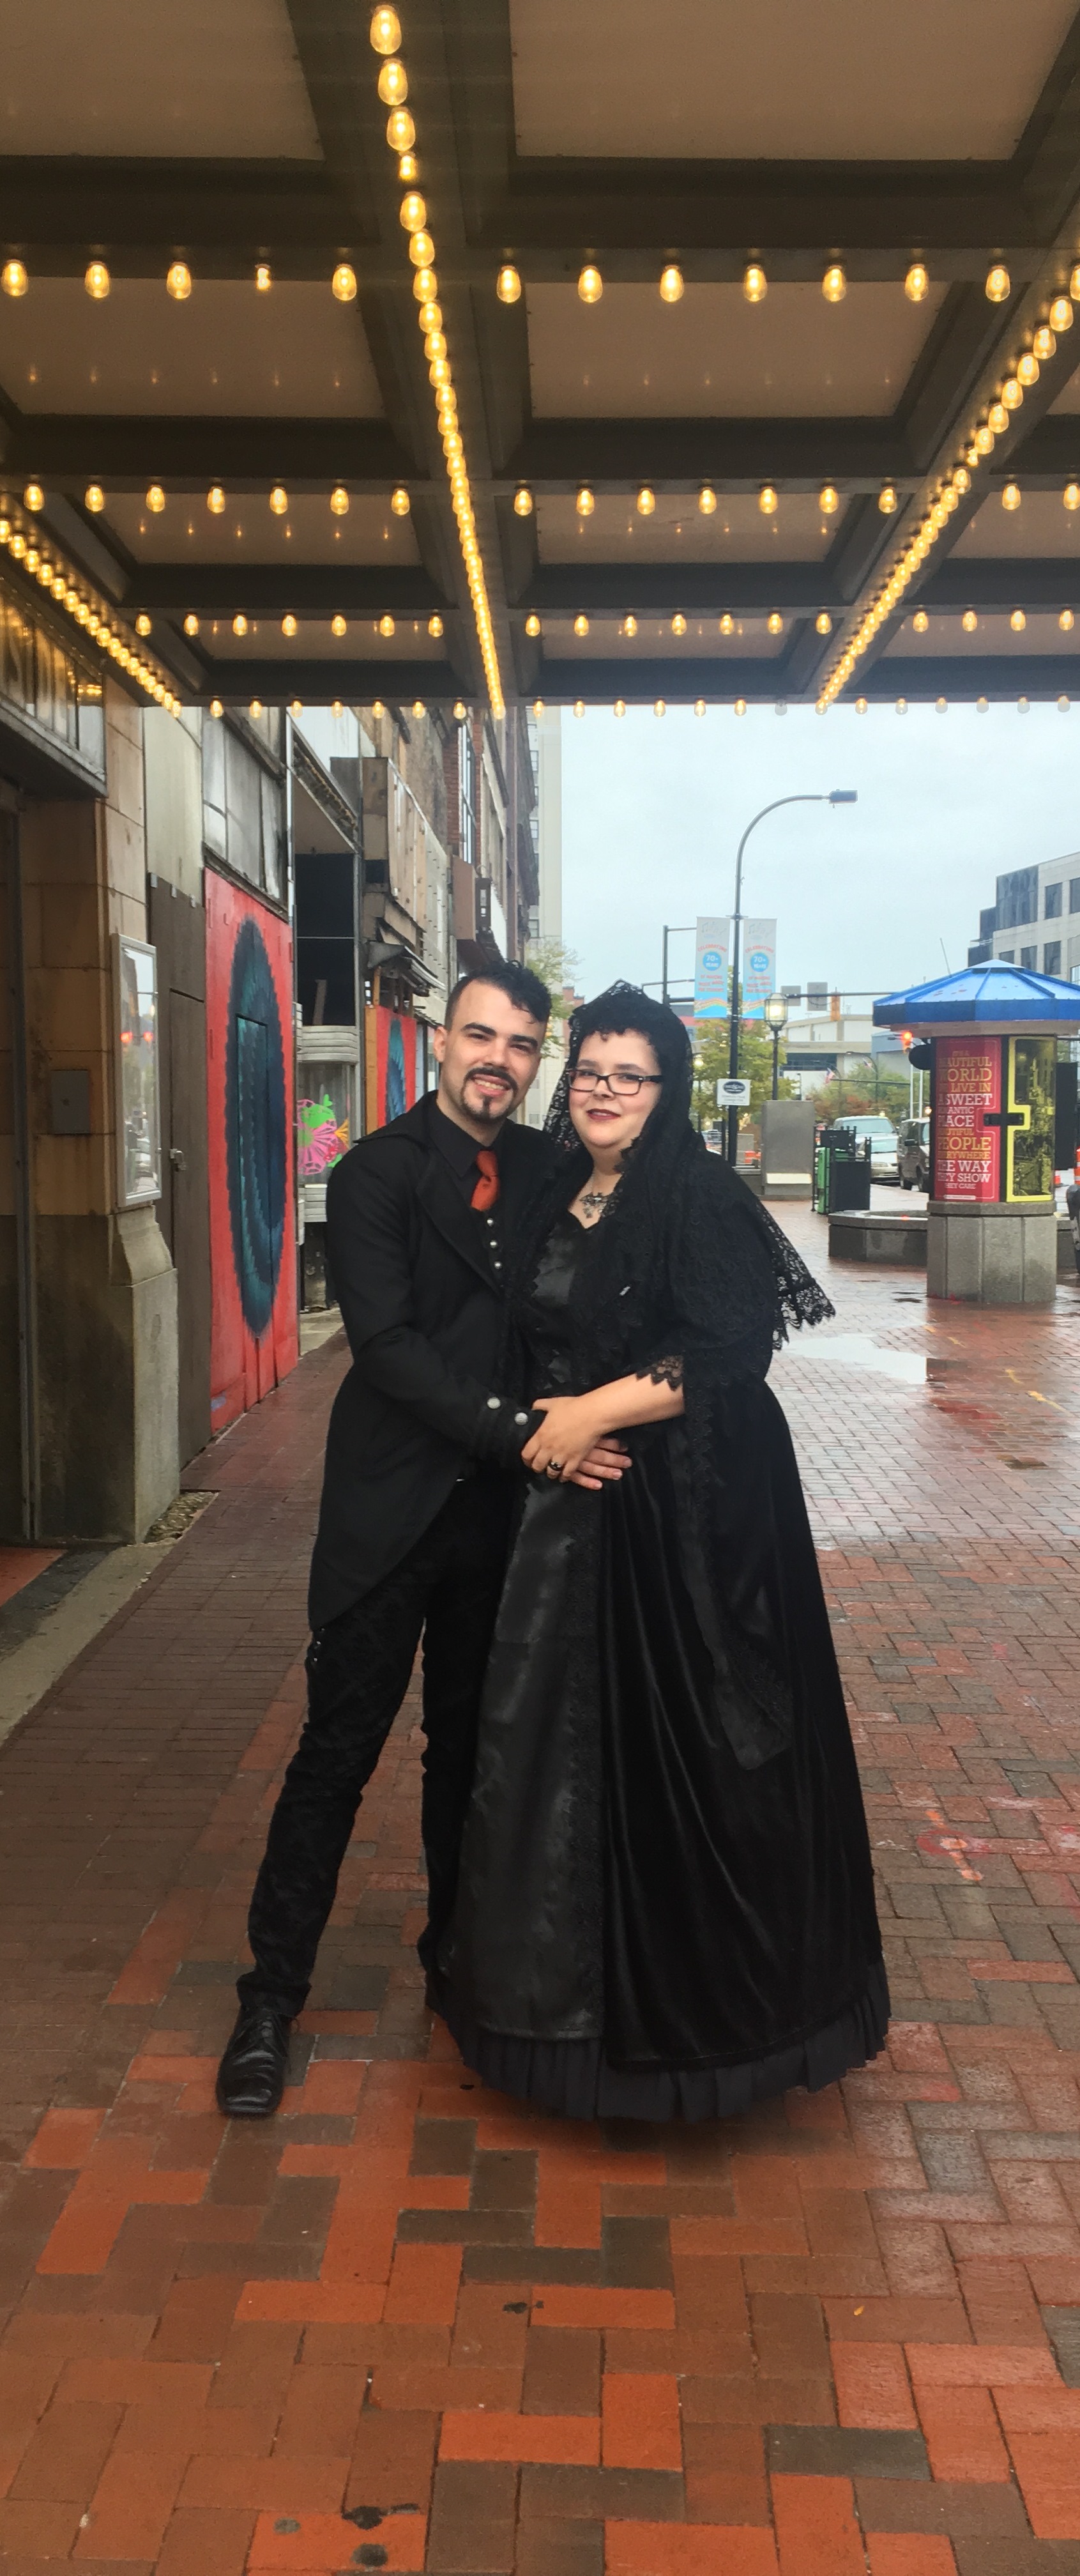 Mr. Josh Brown and Mrs. Anita James were married on Halloween in 2018 at the Akron Civic Theatre